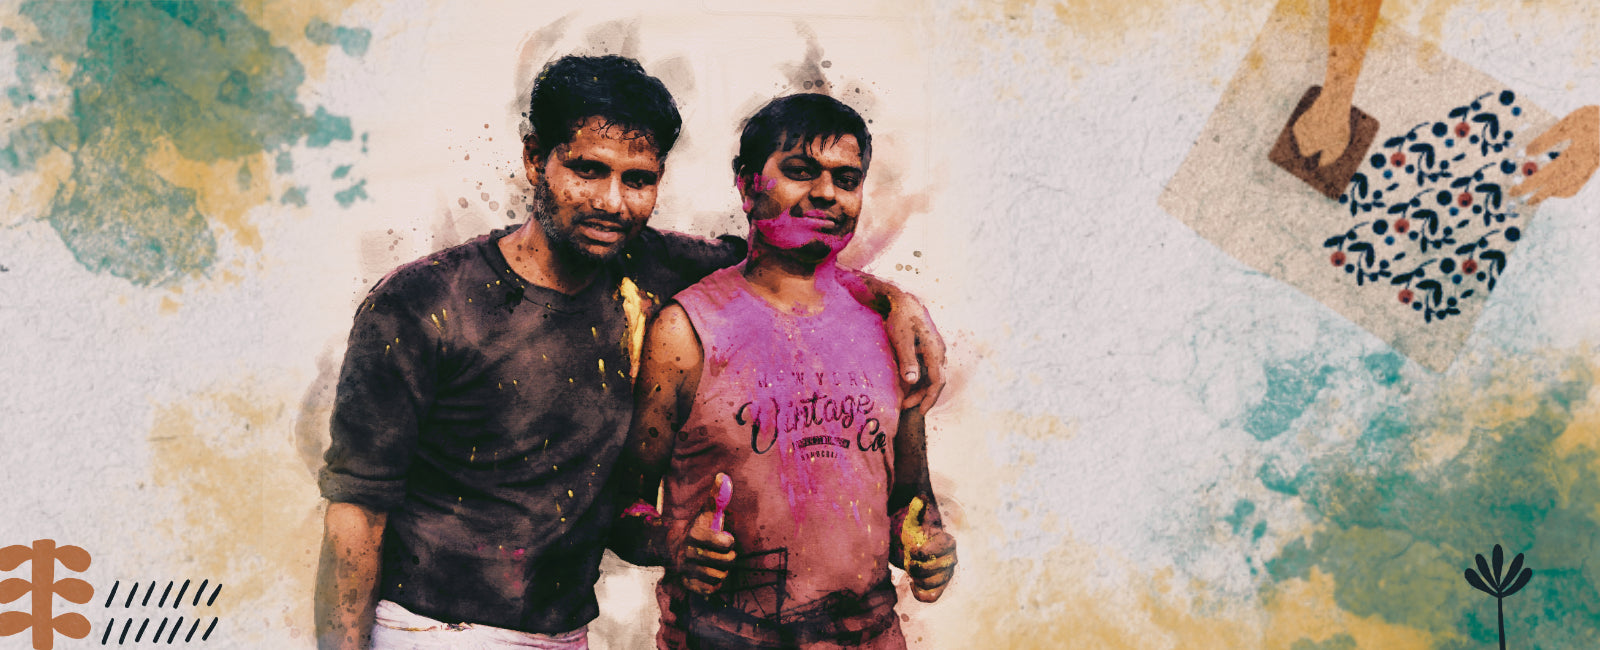 This Holi, celebrating those who bring colors to our lives - Fabriclore